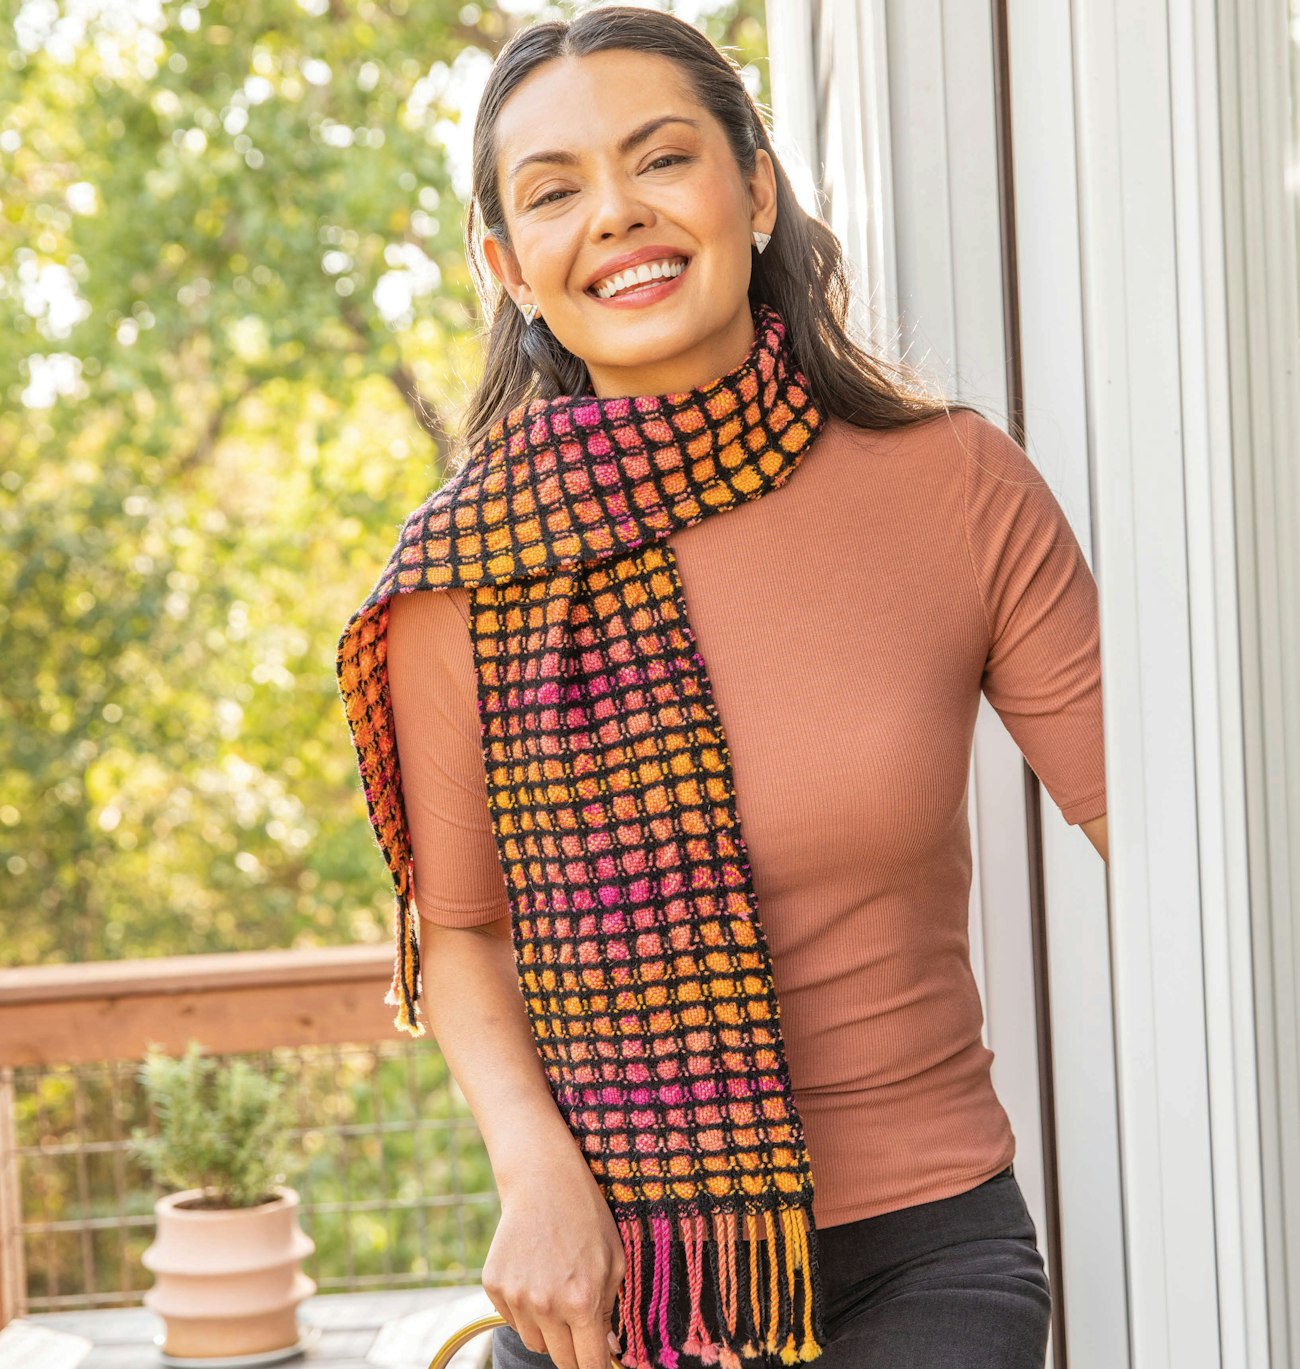 Sunset View Scarf by Constance Hall. Photo by Matt Graves